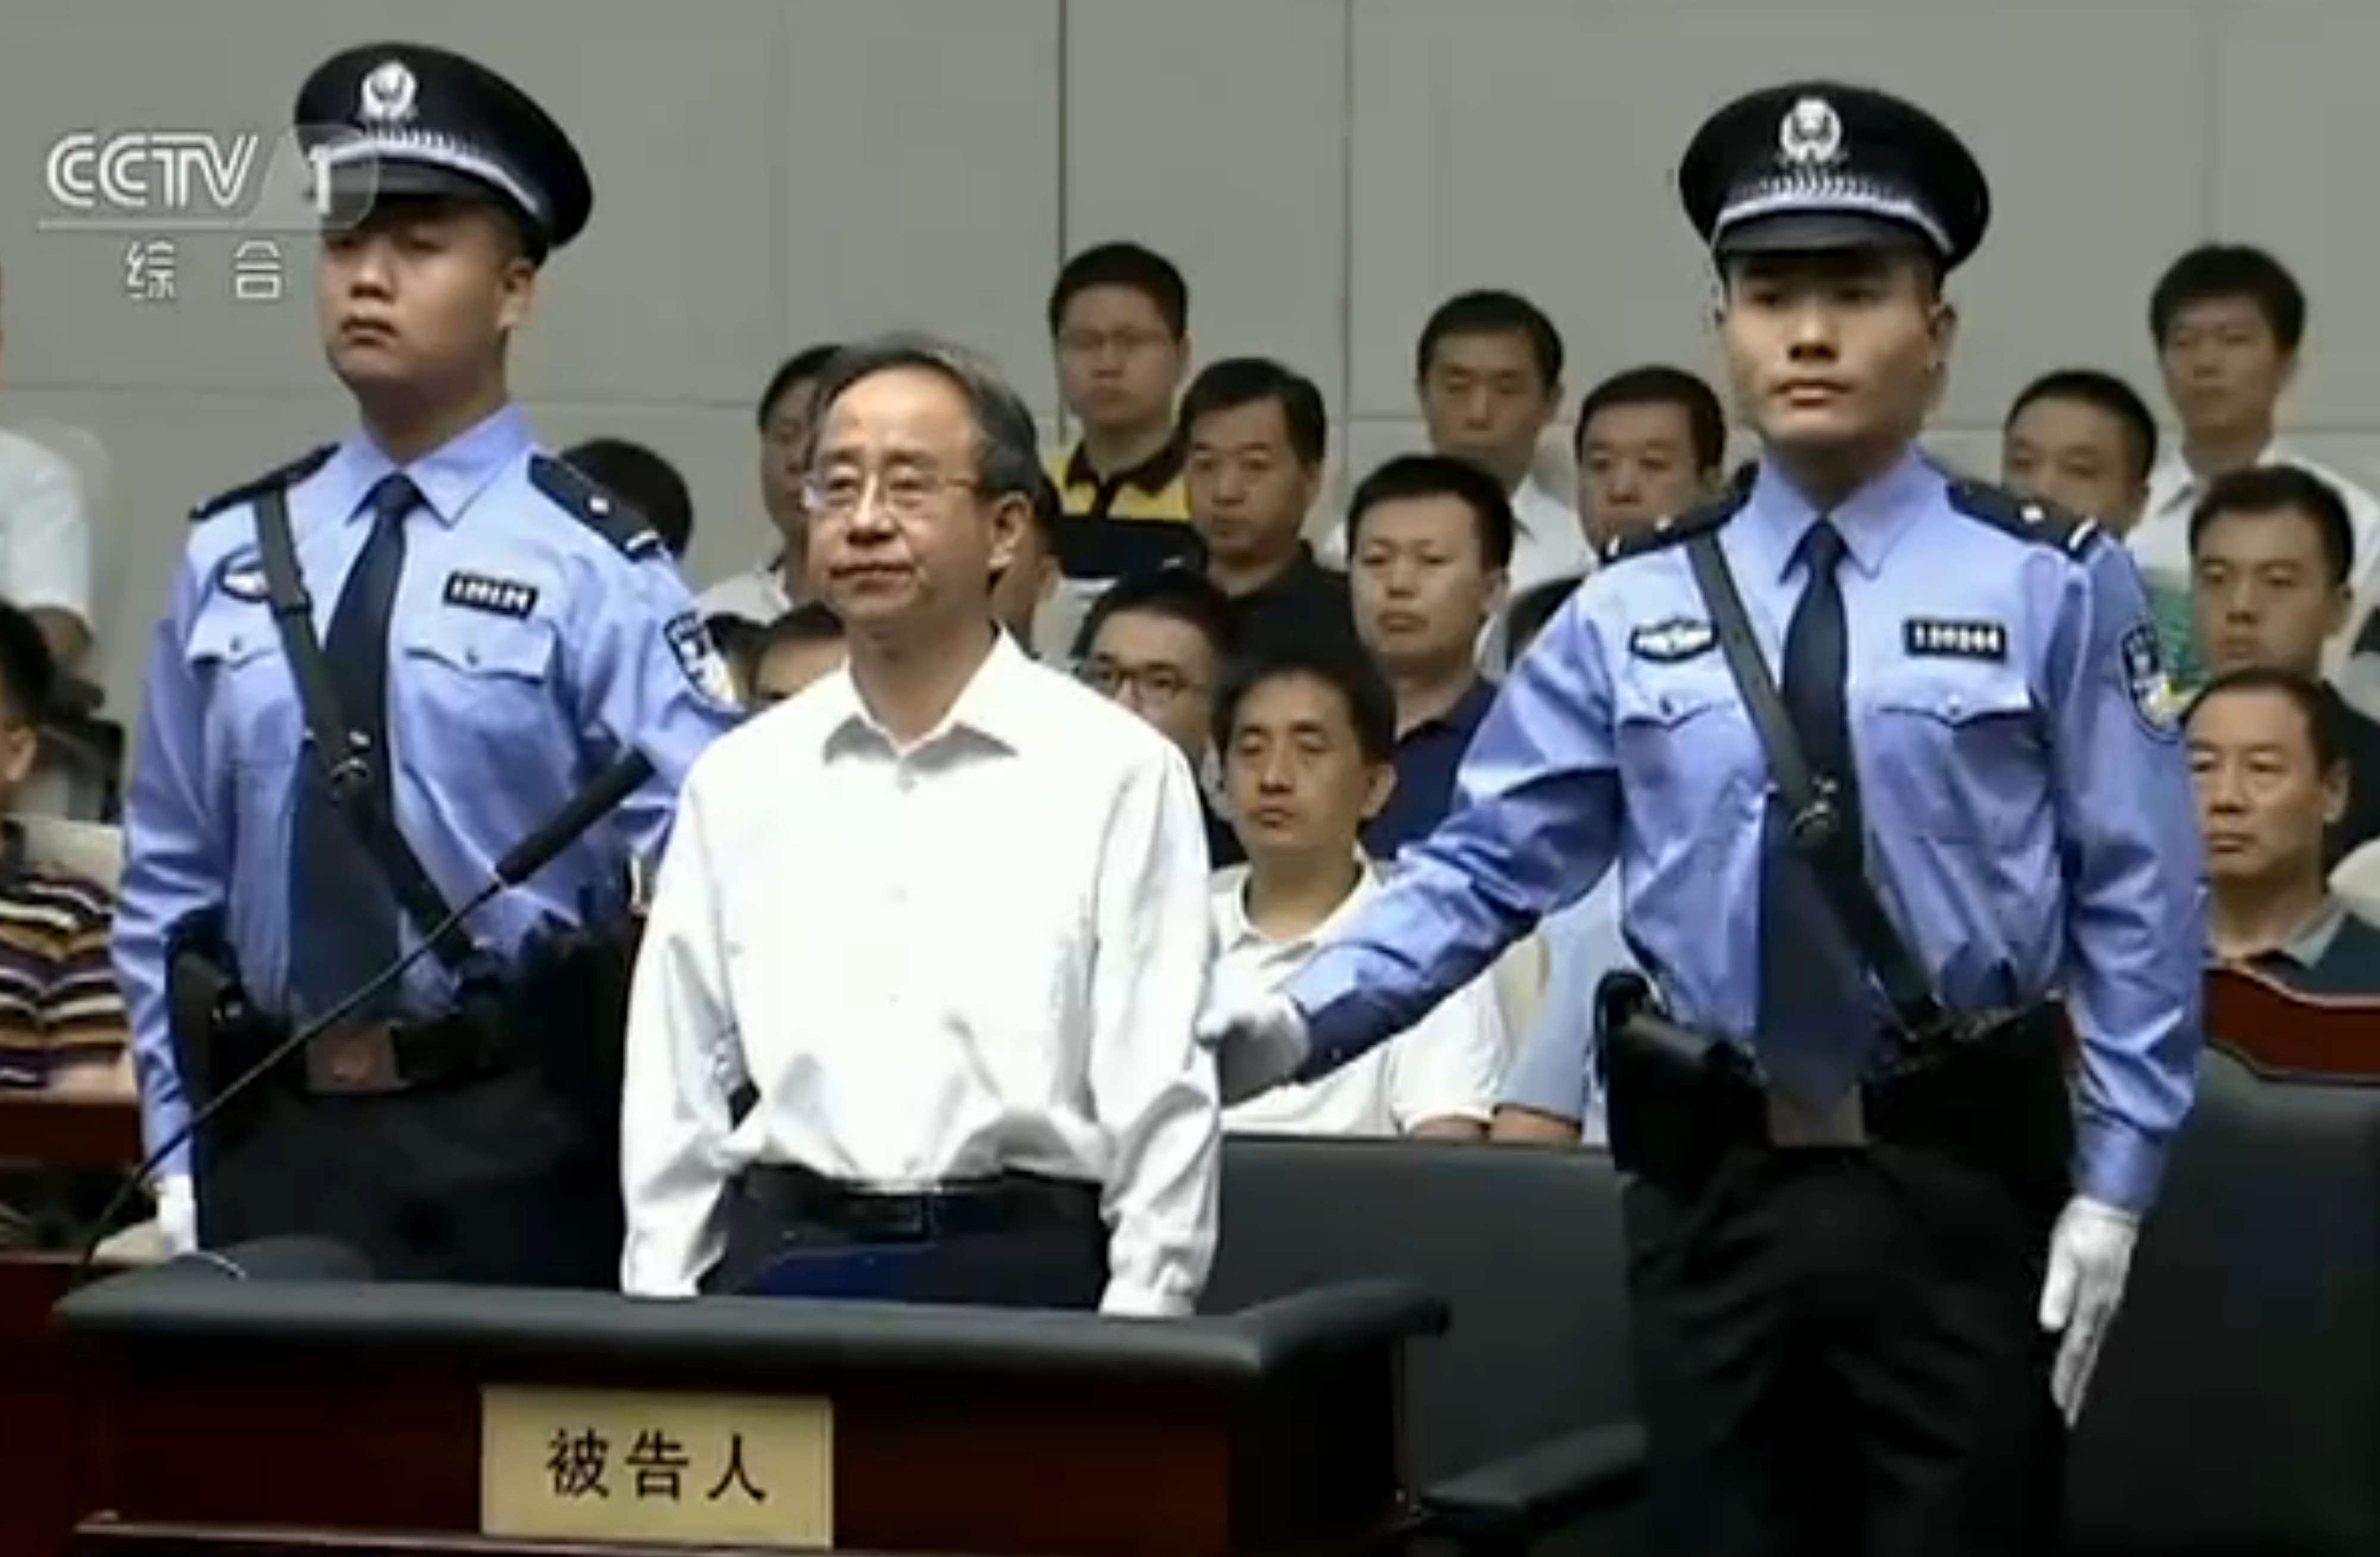 CCTV footage shows former presidential aide Ling Jihua on trial in Tianjin. SCMP Pictures